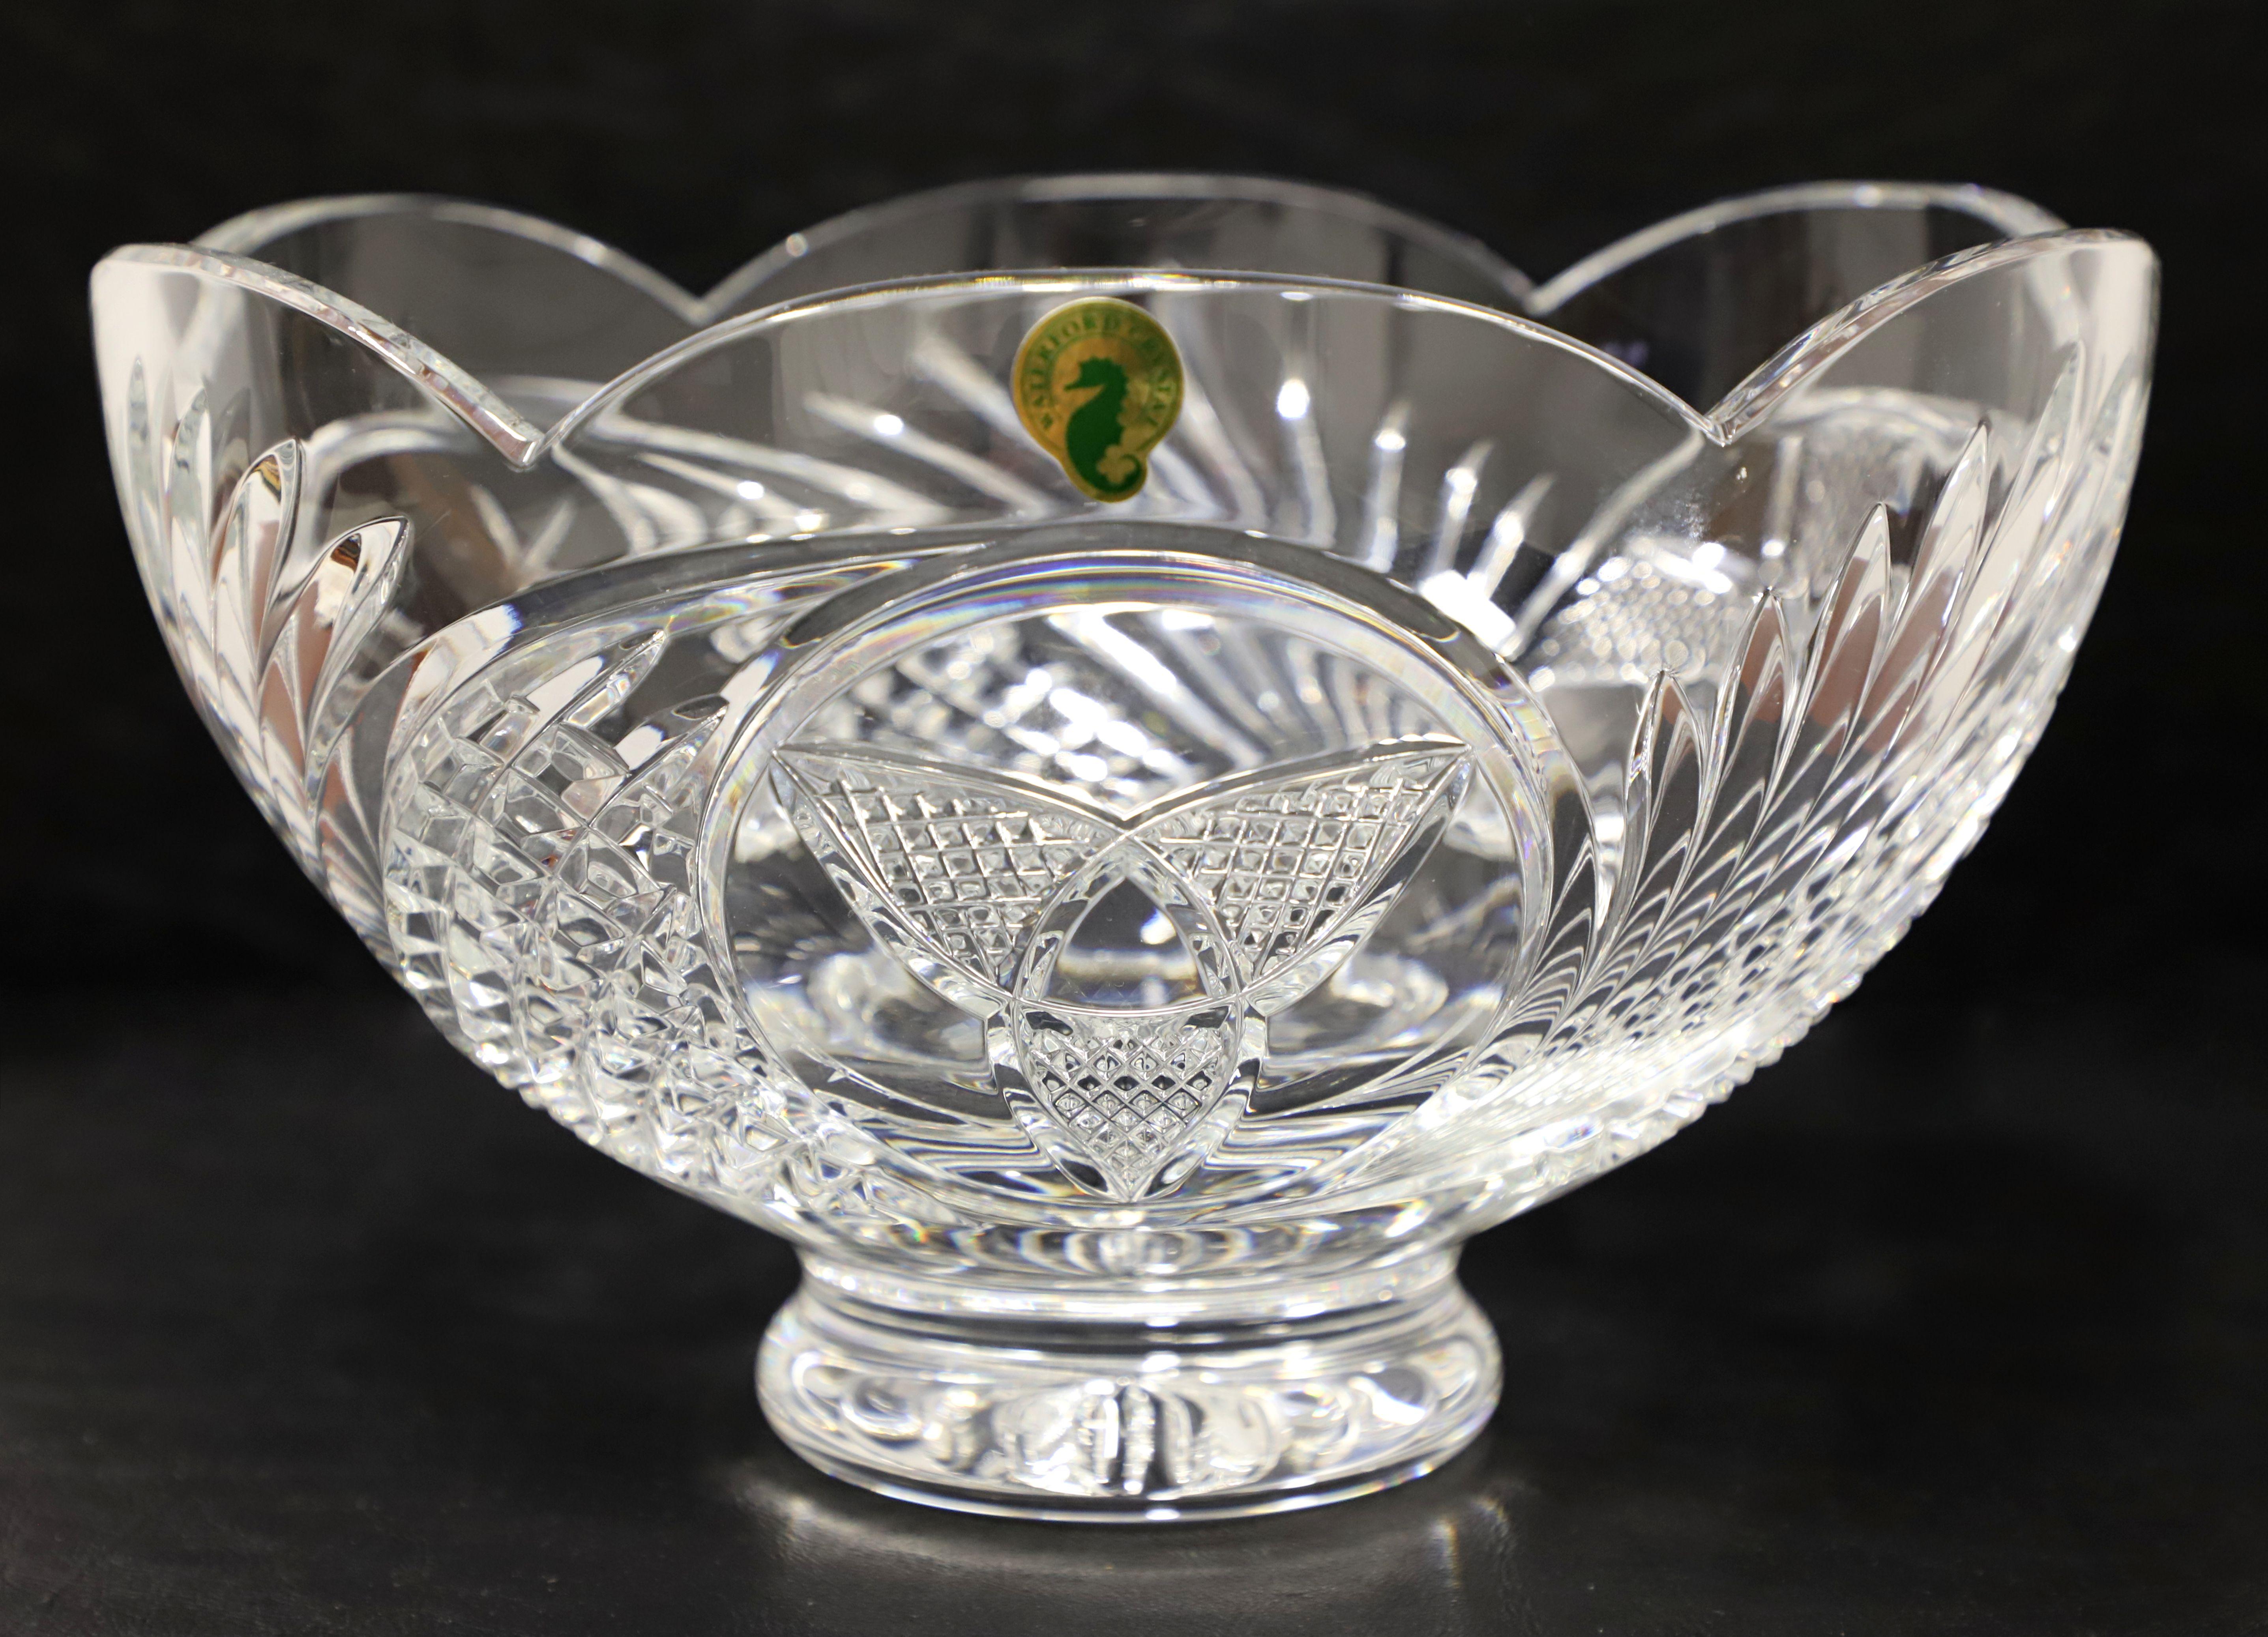 An Early 21st Century round centerpiece bowl by Waterford, their 